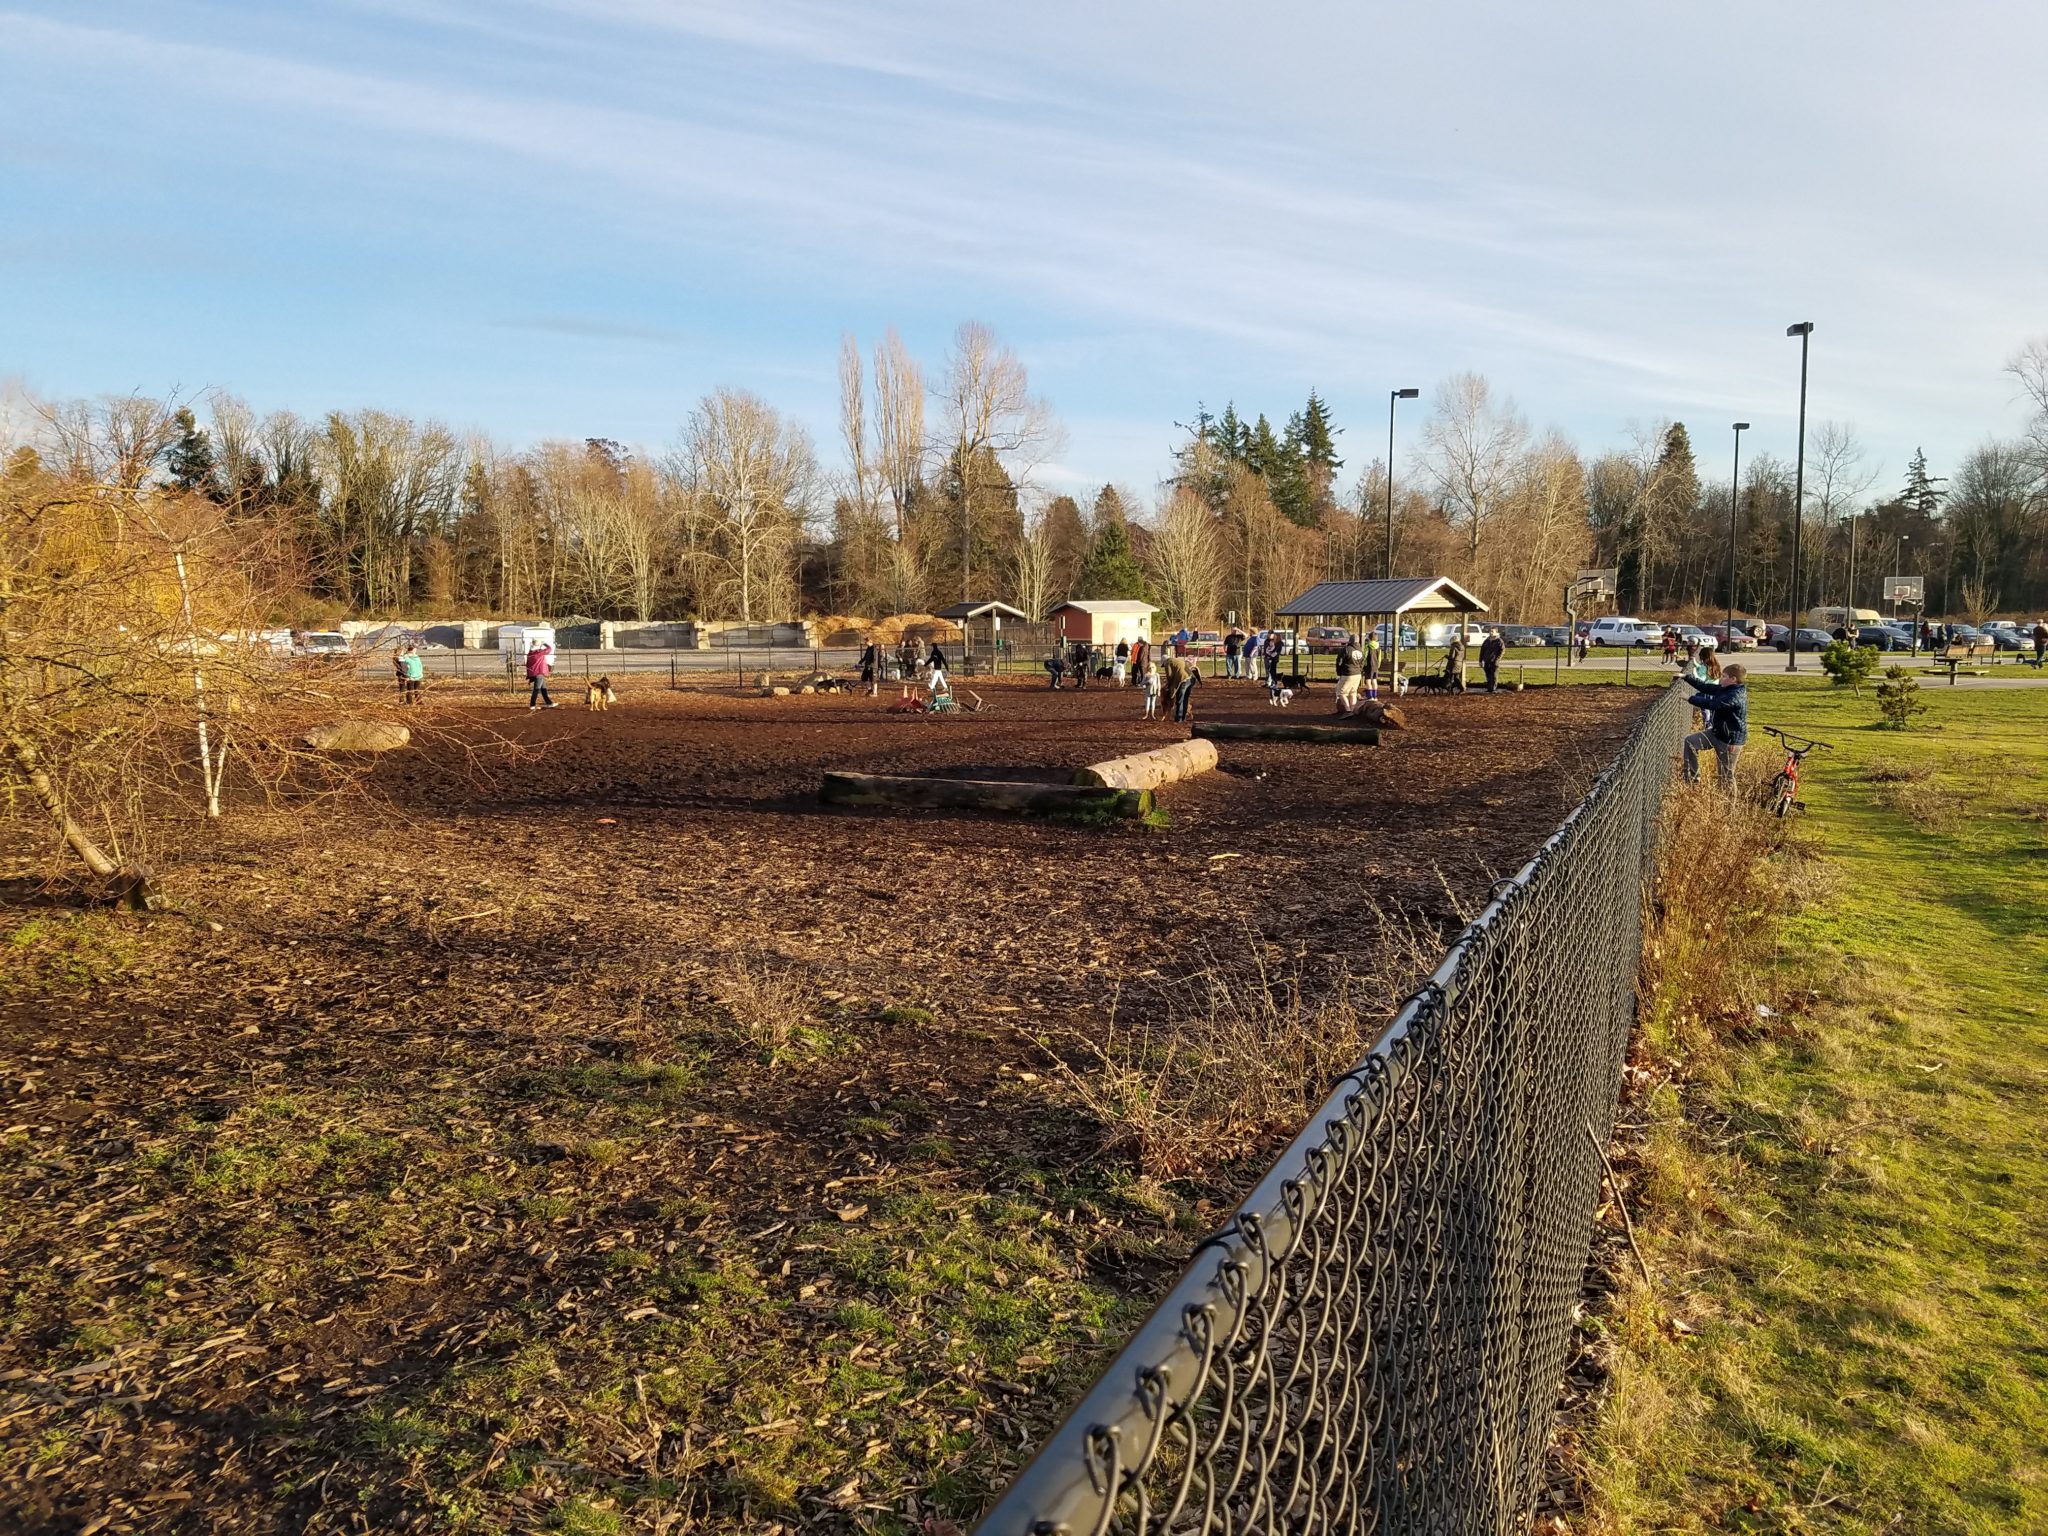 Dog parks can be a source of bacterial contamination to streams, lakes and Puget Sound. This area has an infiltration basin along the far fence to treat the water.